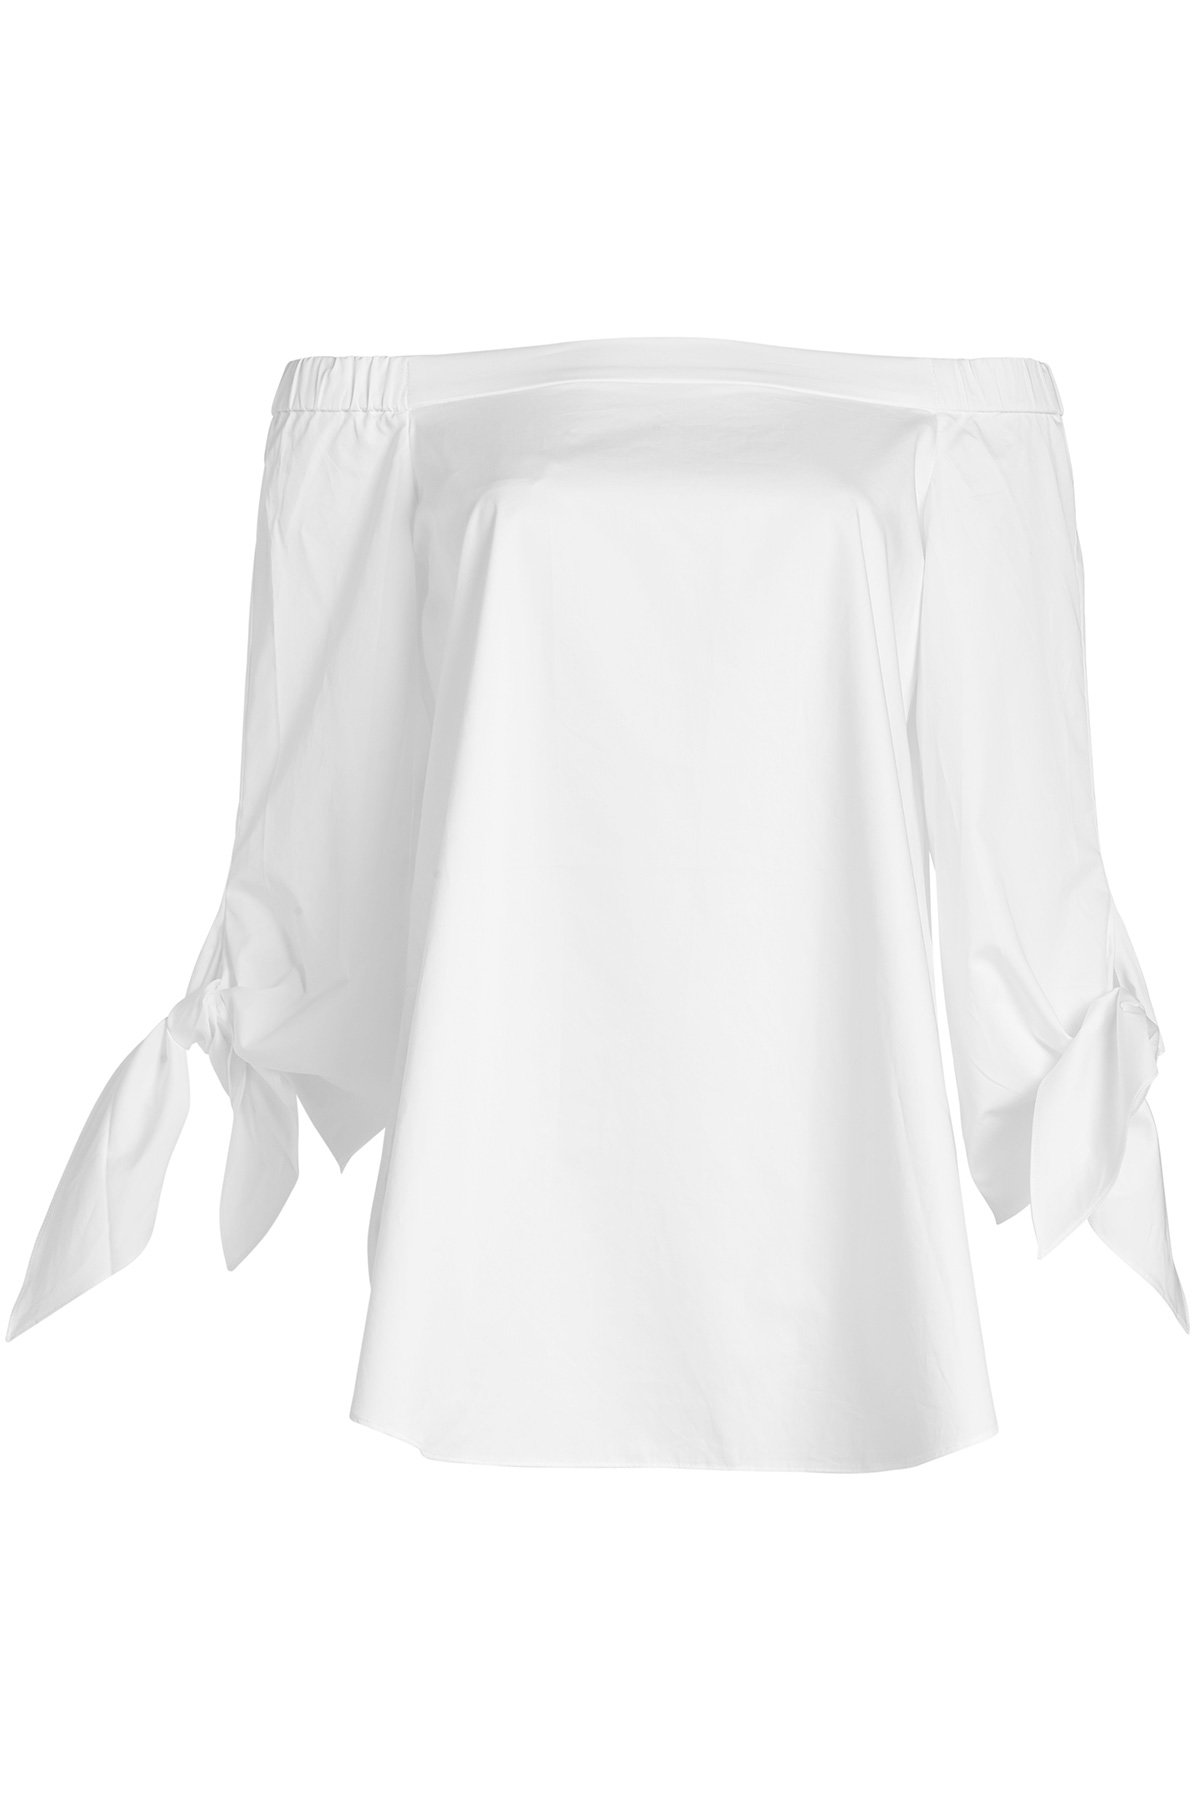 Cotton Off-Shoulder Top with Bow Sleeves by Tibi